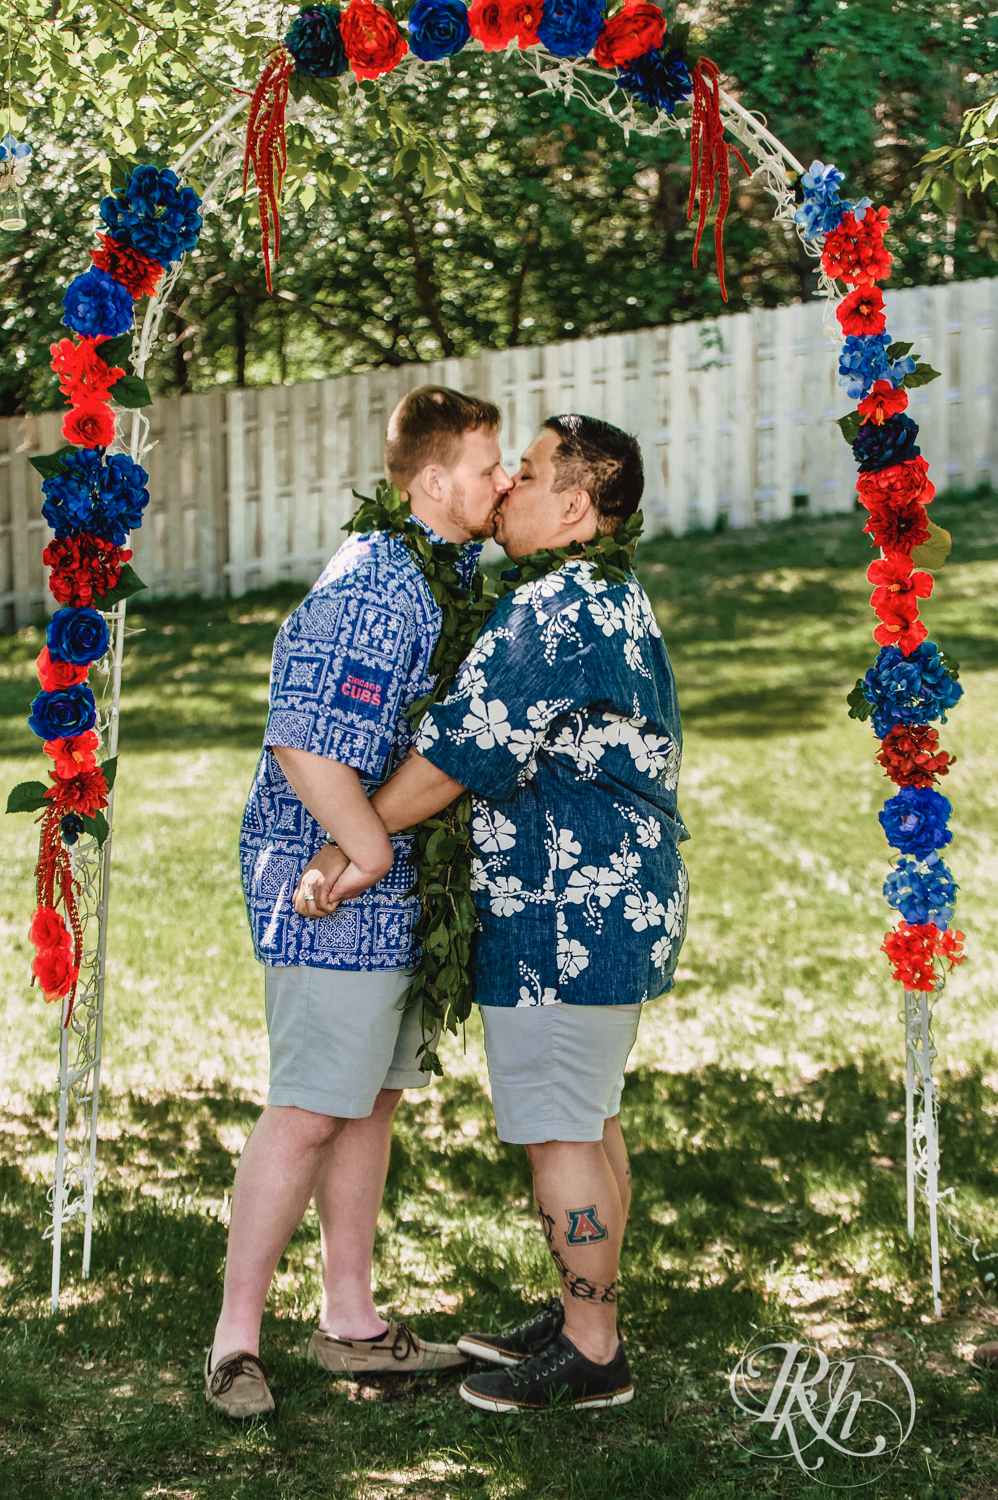 Two grooms kiss during backyard elopement ceremony while wearing Hawaiian shirts and leis.